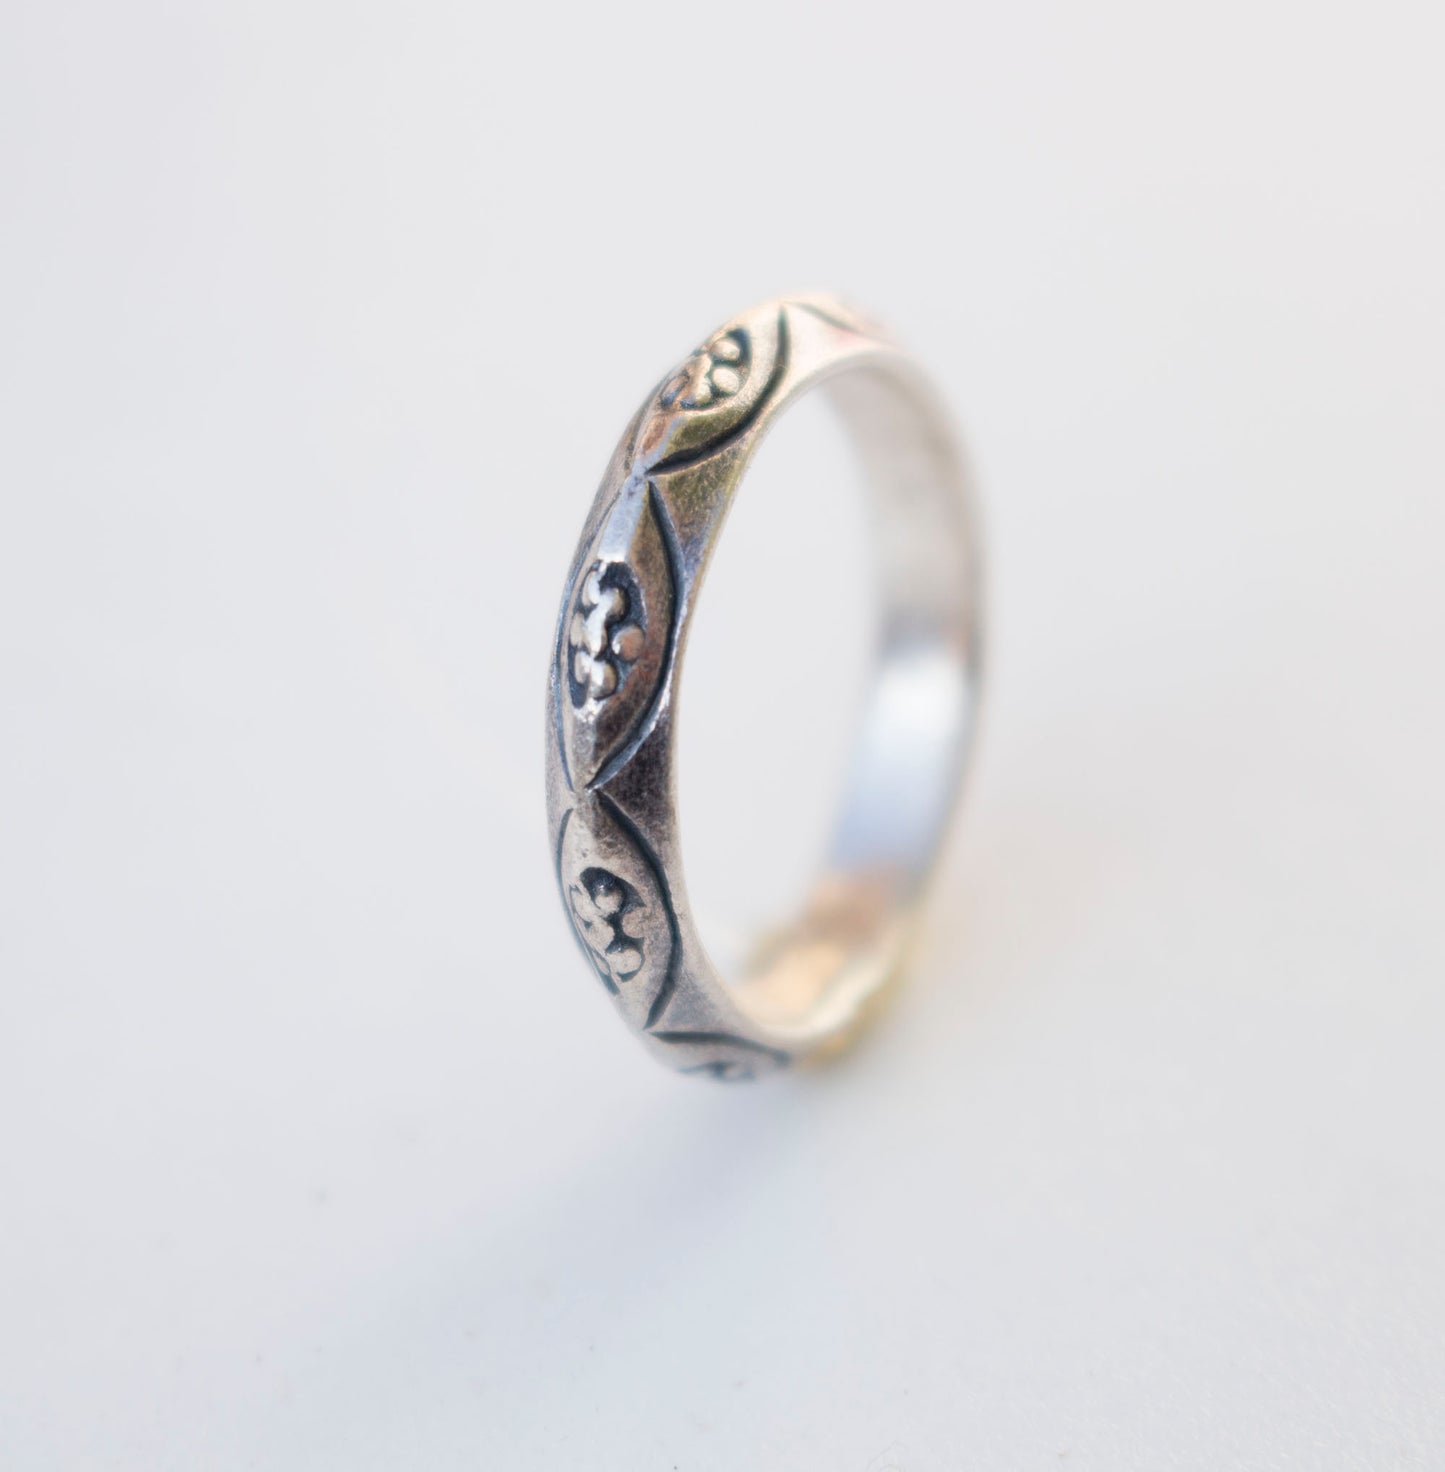 Stamped Sterling Silver ring